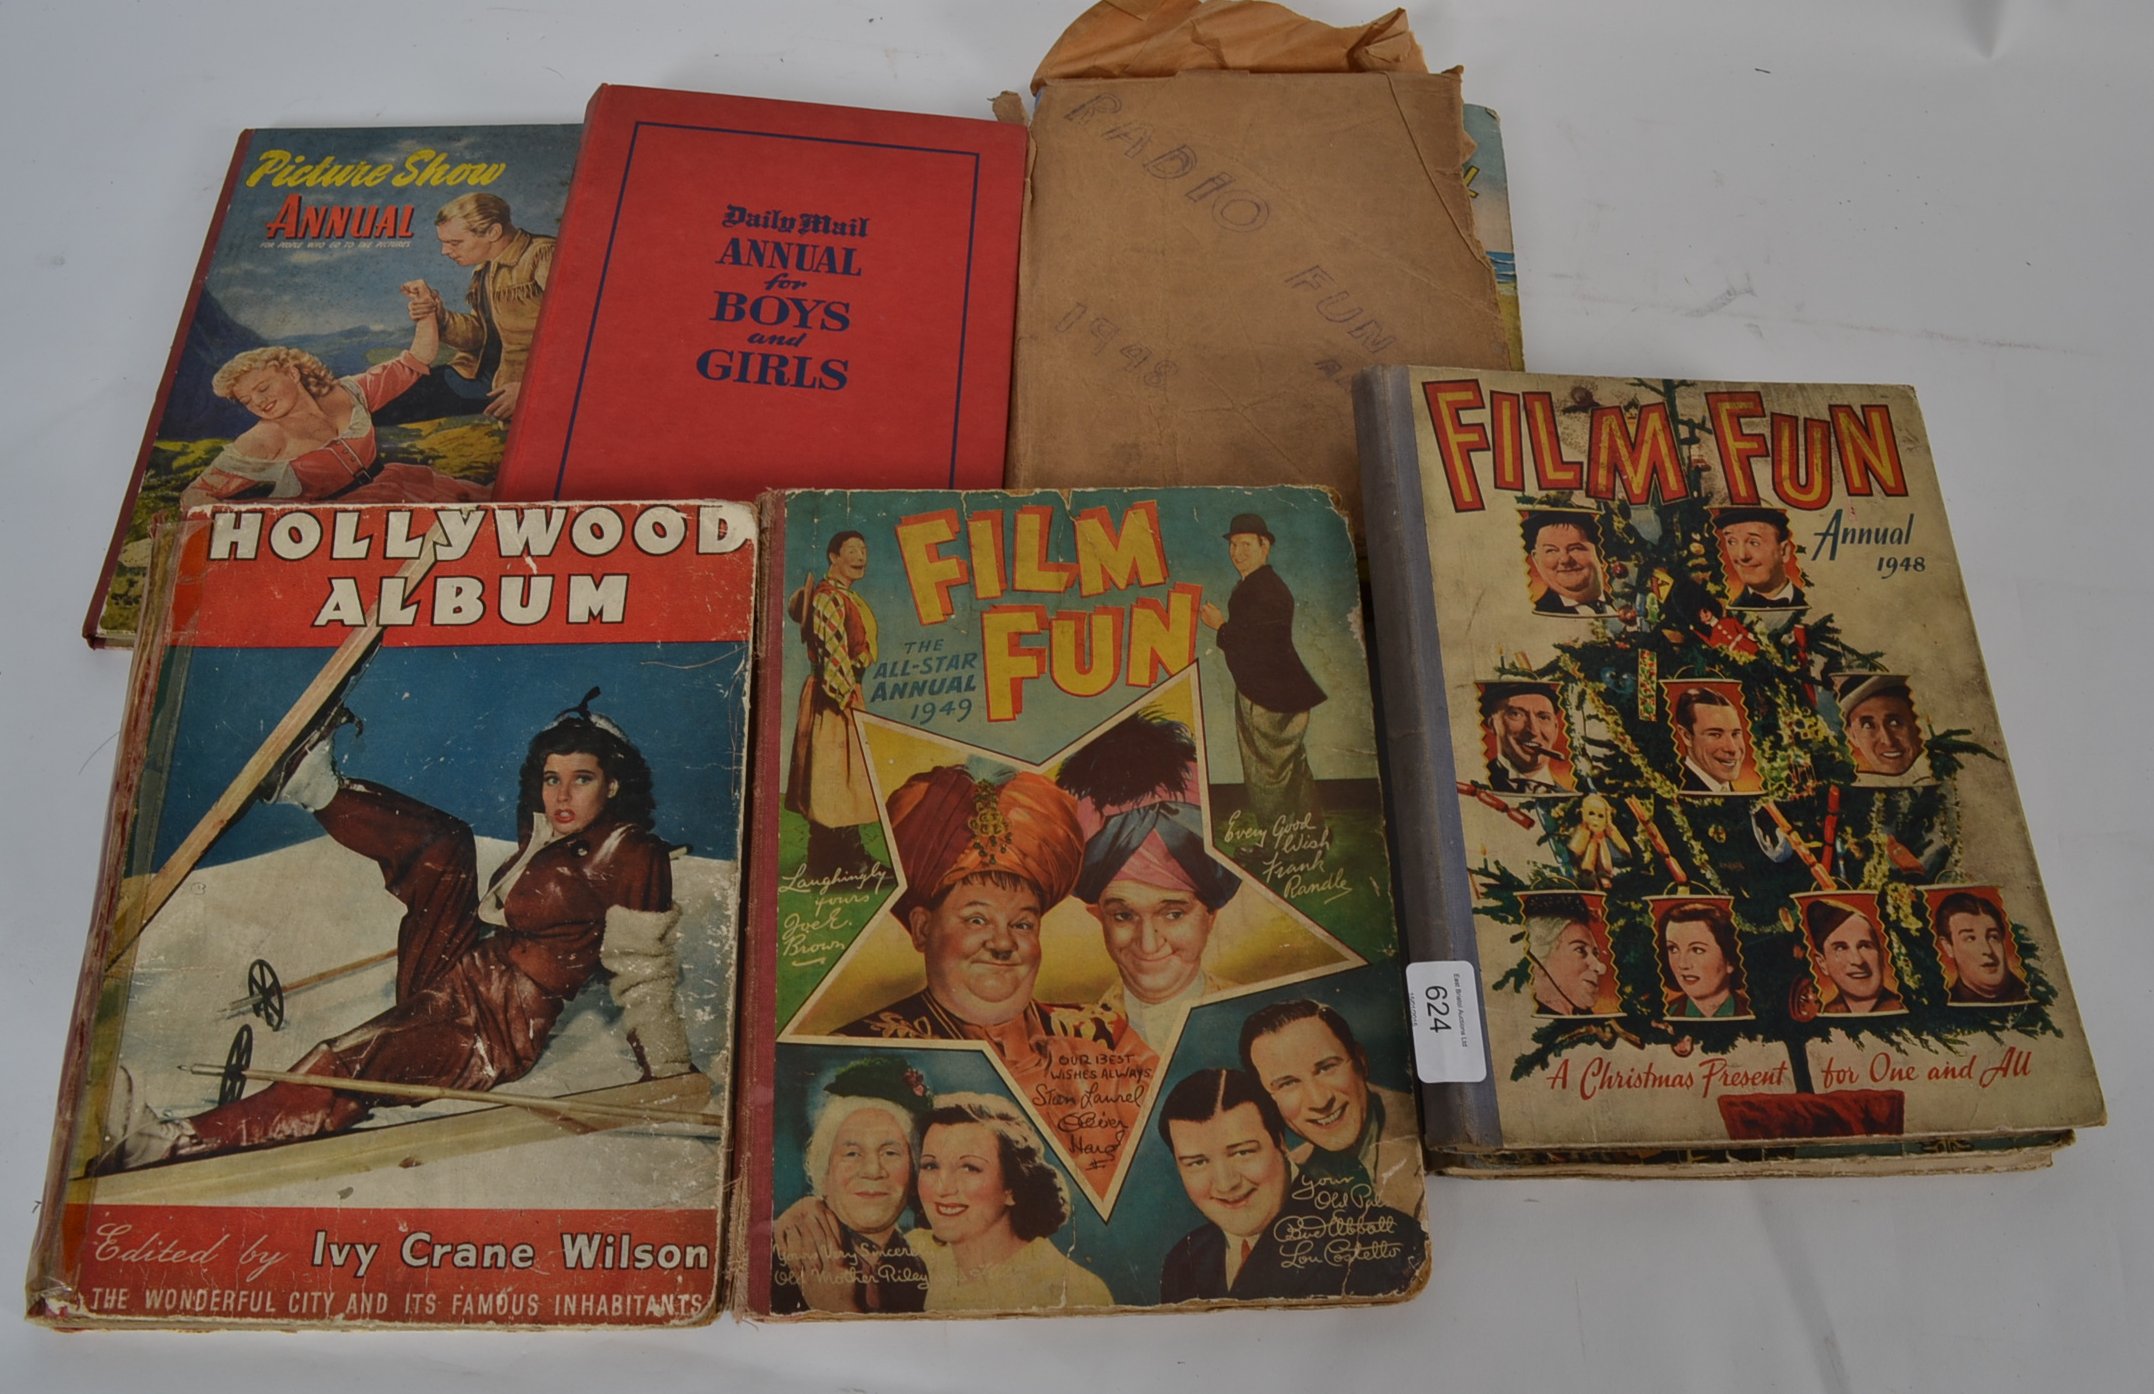 A collection of vintage 1940's Film Fun